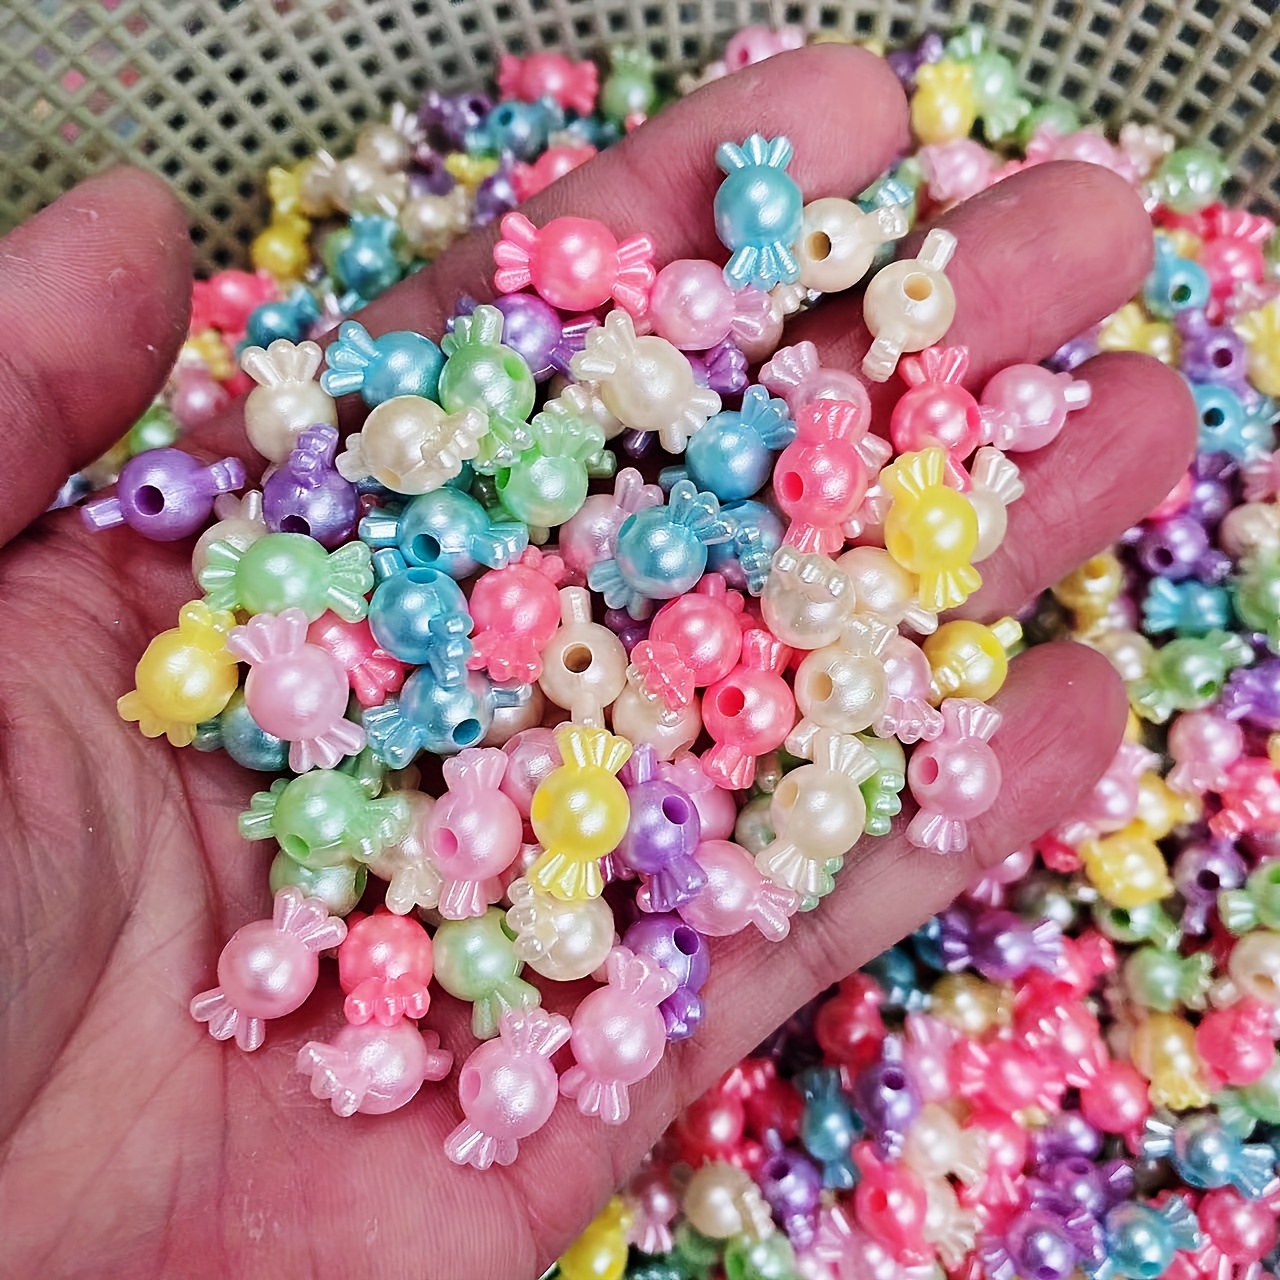  500 Pieces Star Pony Beads Large Hole Beads Multi Color Acrylic  Beads Bracelet Kawaii Rainbow Necklace Jewelry Making Craft Beads for  Christmas Valentine's Day Present